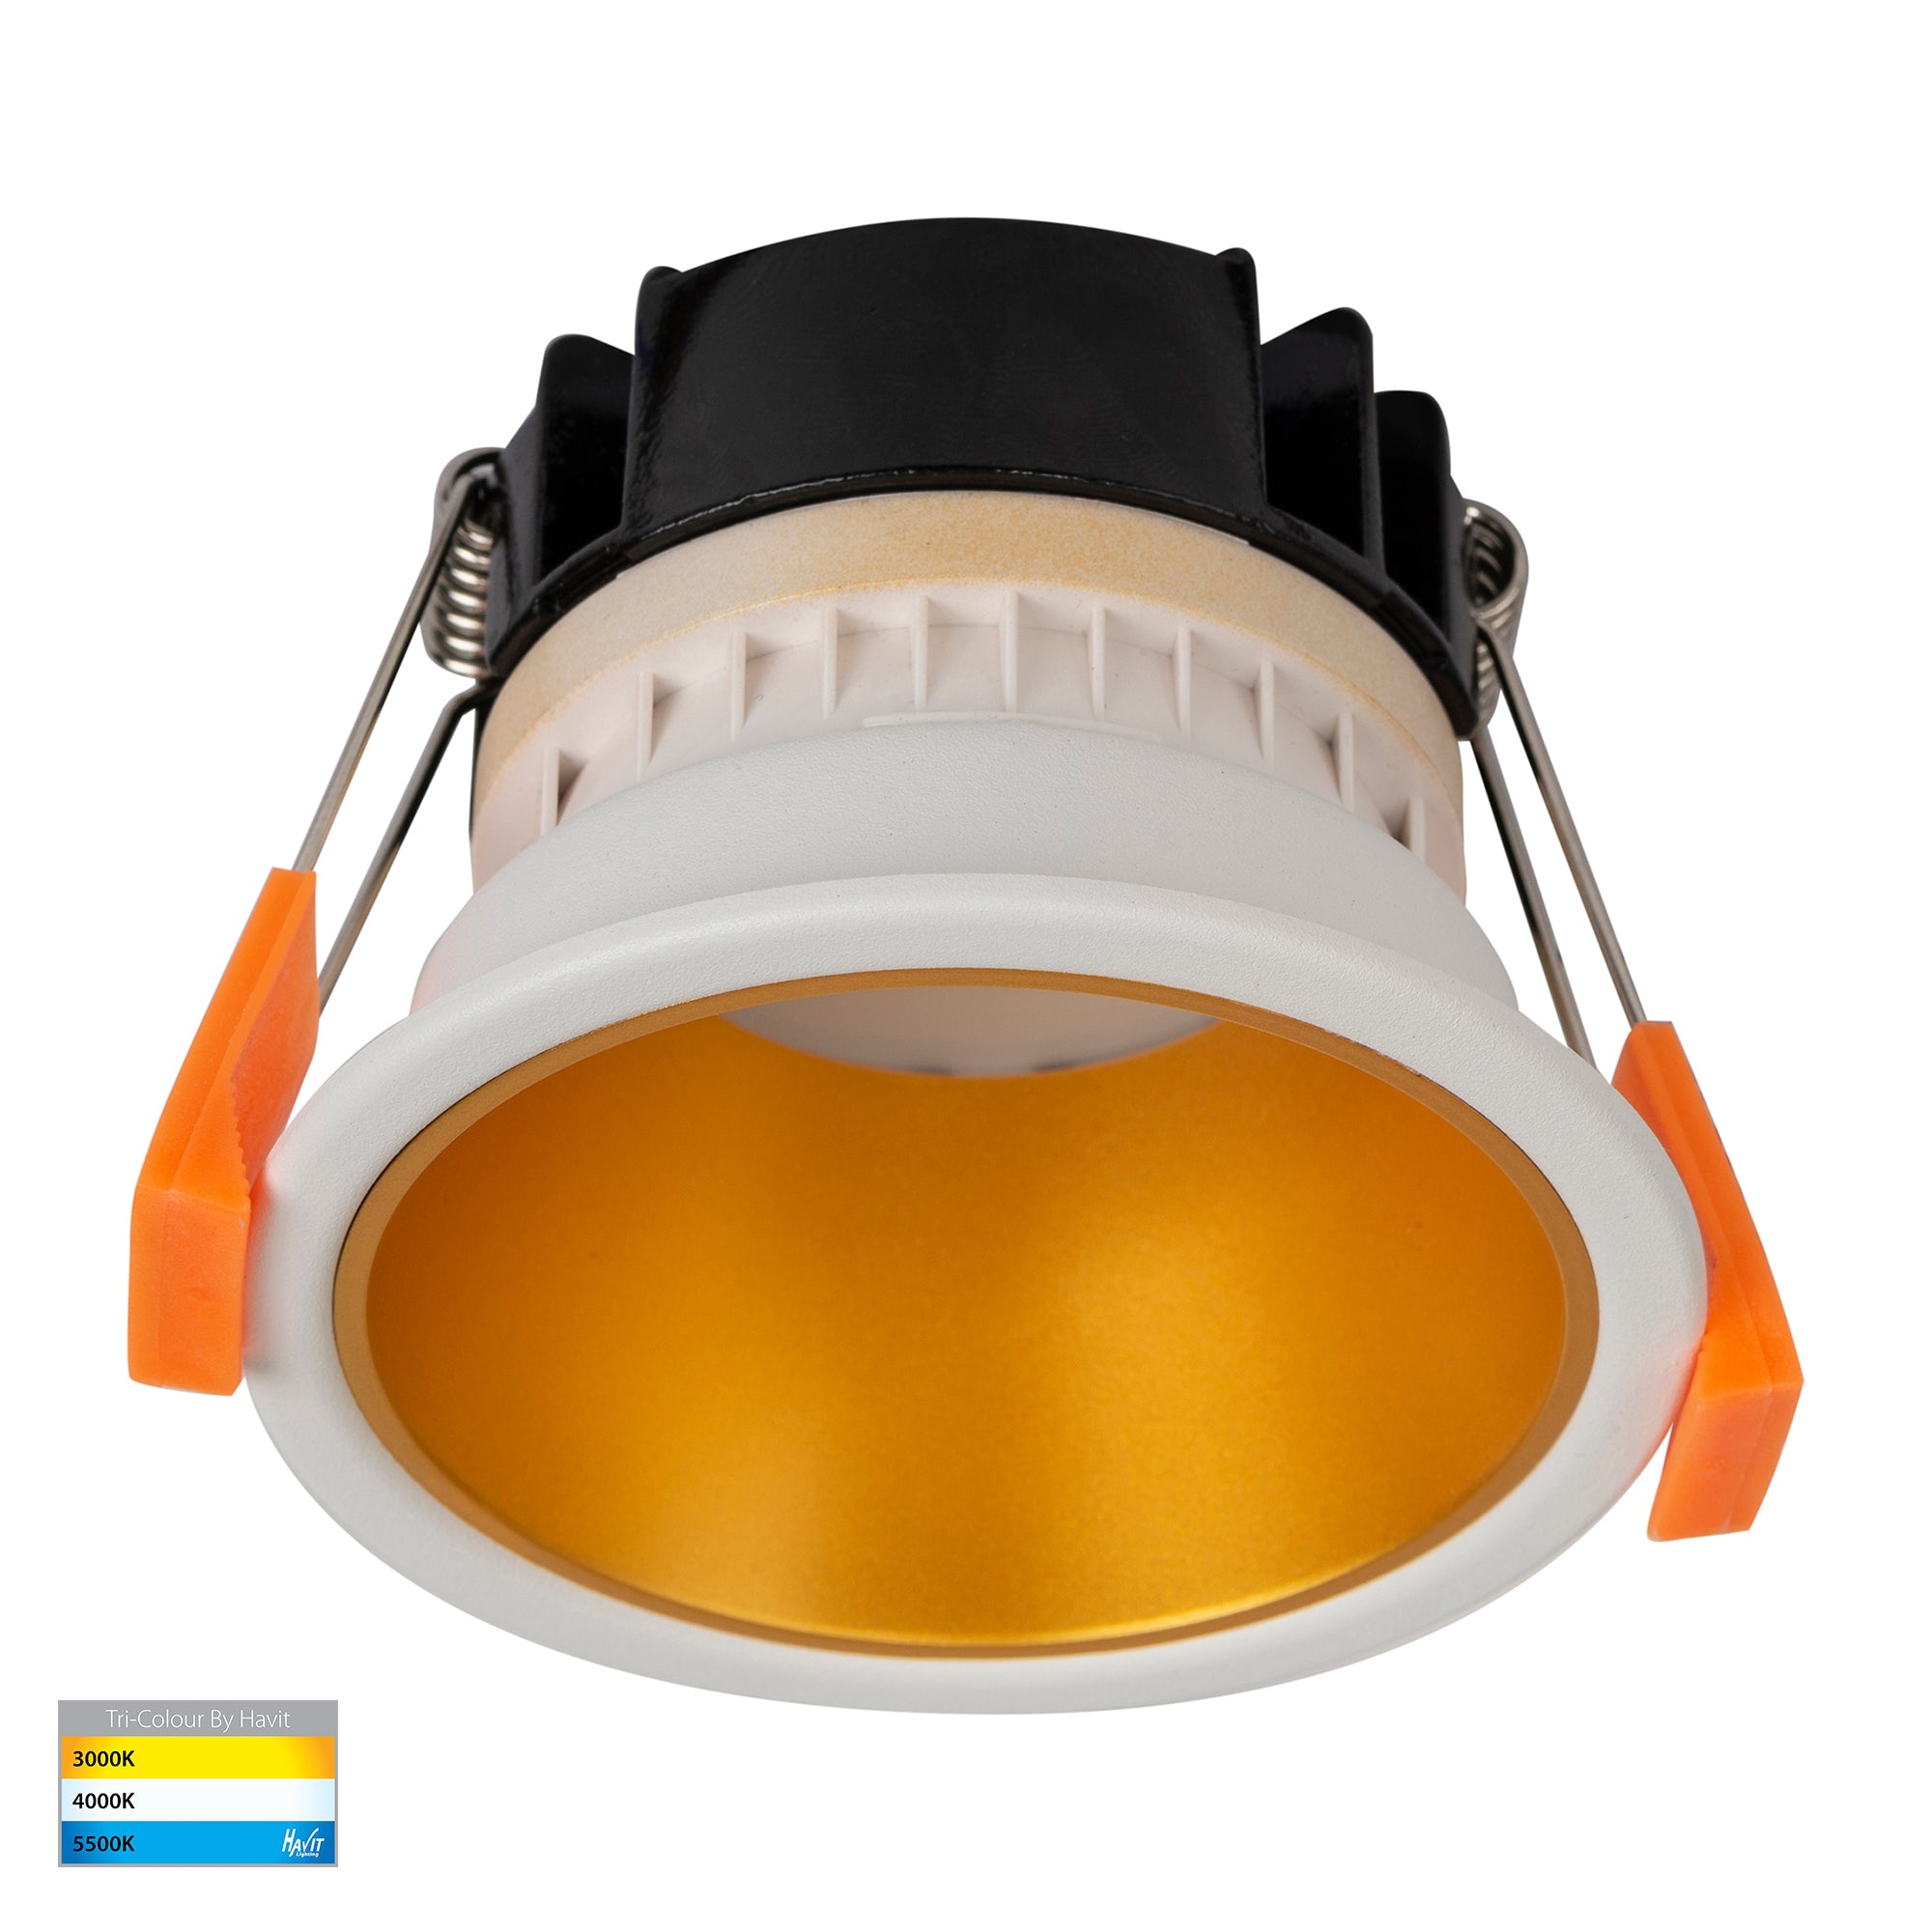 HV5529T-WG - Gleam White with Gold Insert Tri Colour Fixed Deep LED Downlight